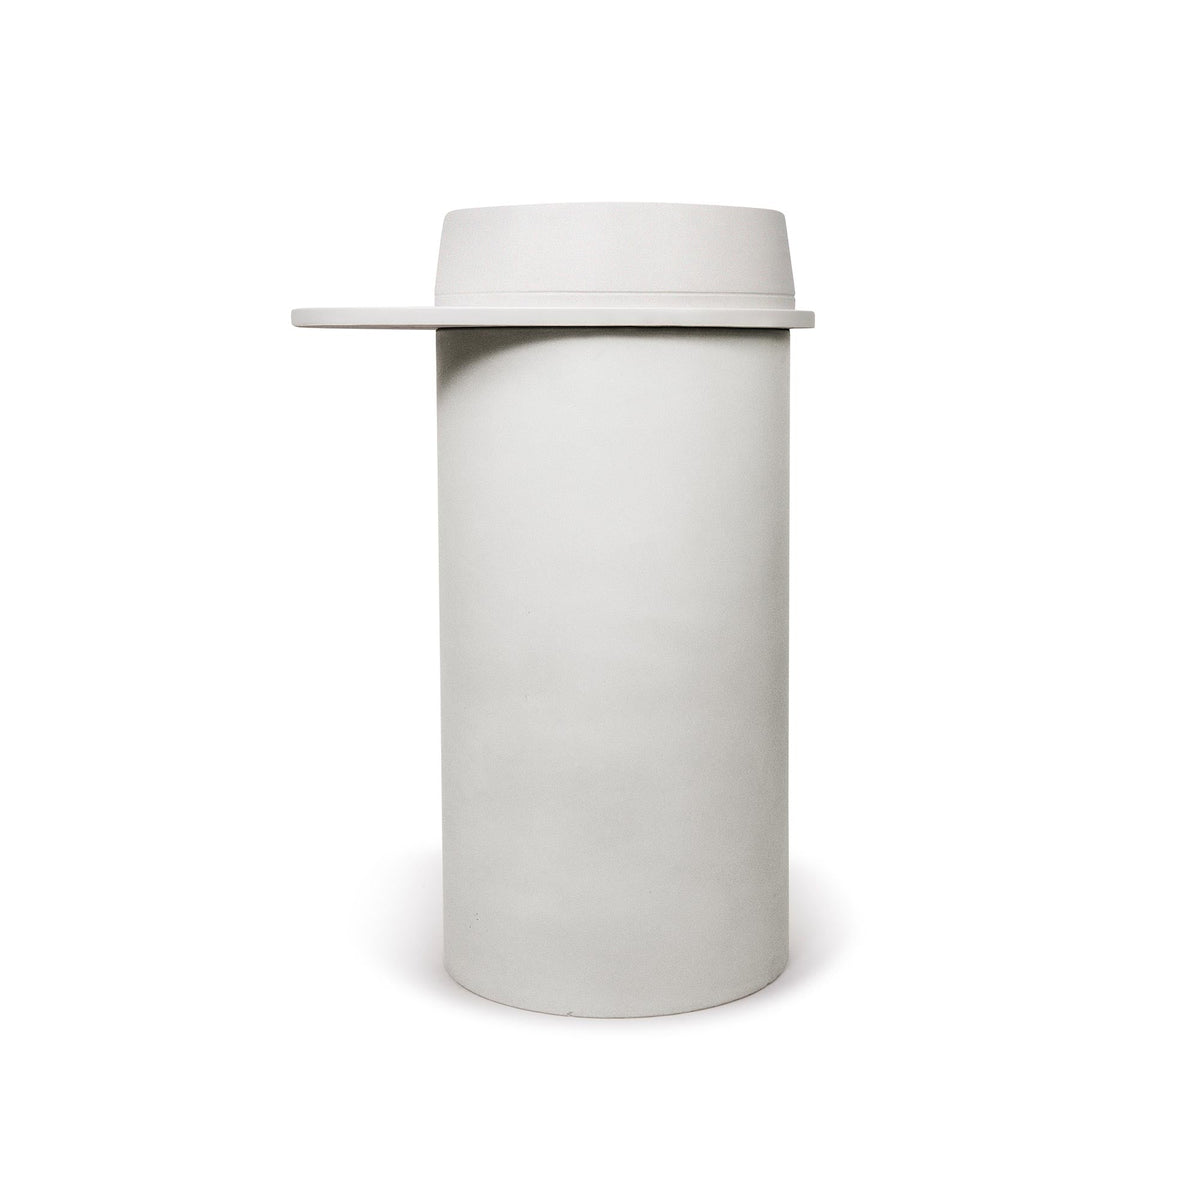 Cylinder with Tray - Funl Basin (Charcoal,Clay)